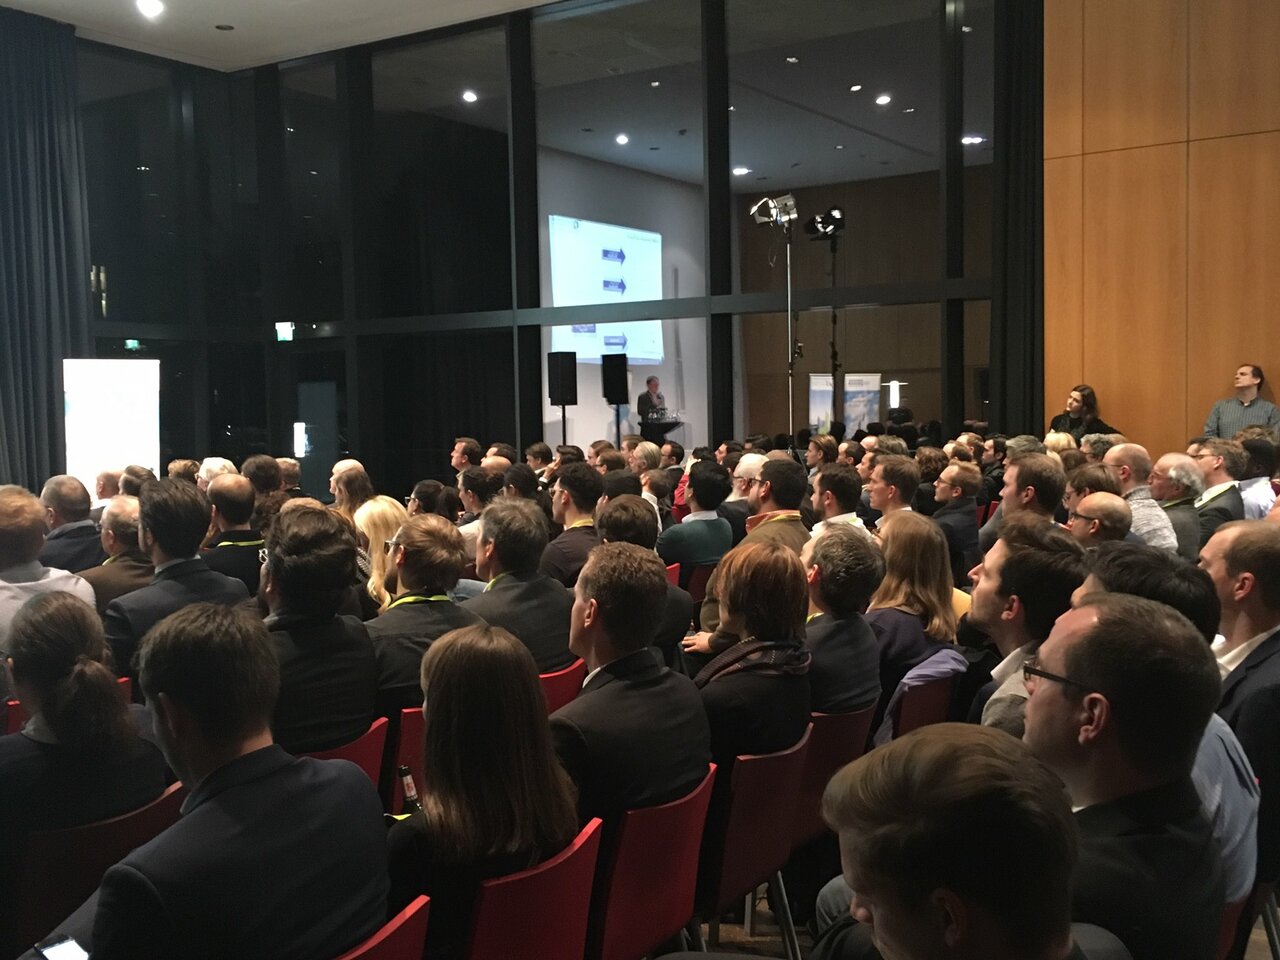 #ICO is today's topic at #betweenthetowers - Full house in #Frankurt https://t.co/7aleDfHscr